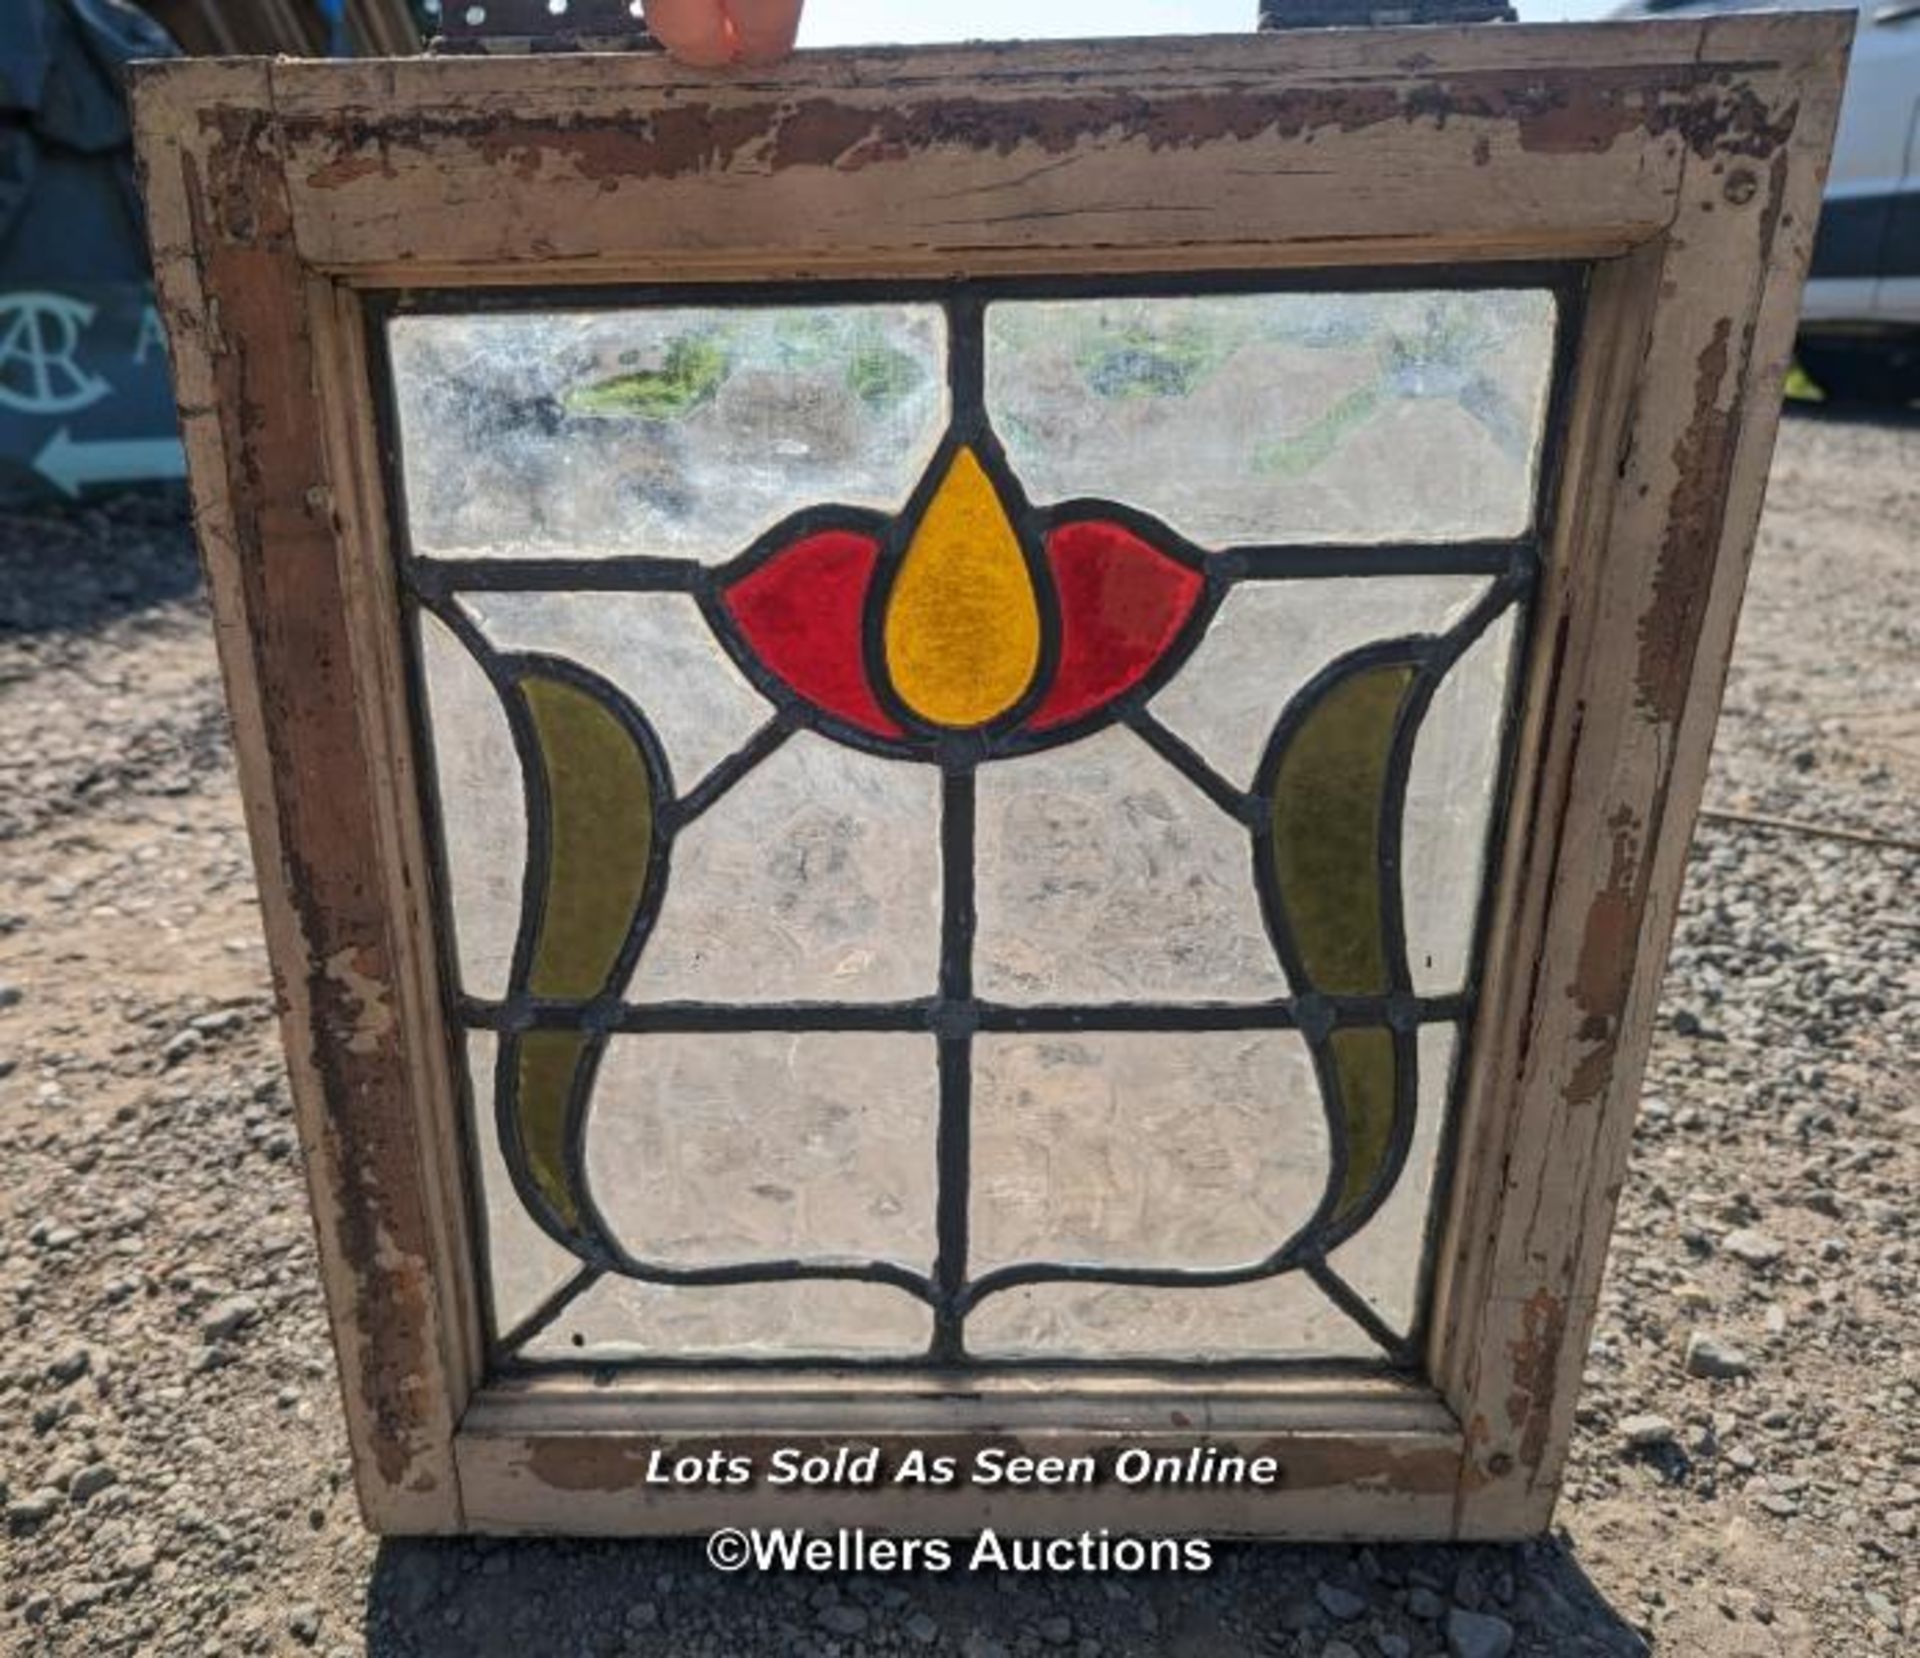 9 stained glass panels in pine frames. 2 frames missing one side. For restoration. Some breaks in